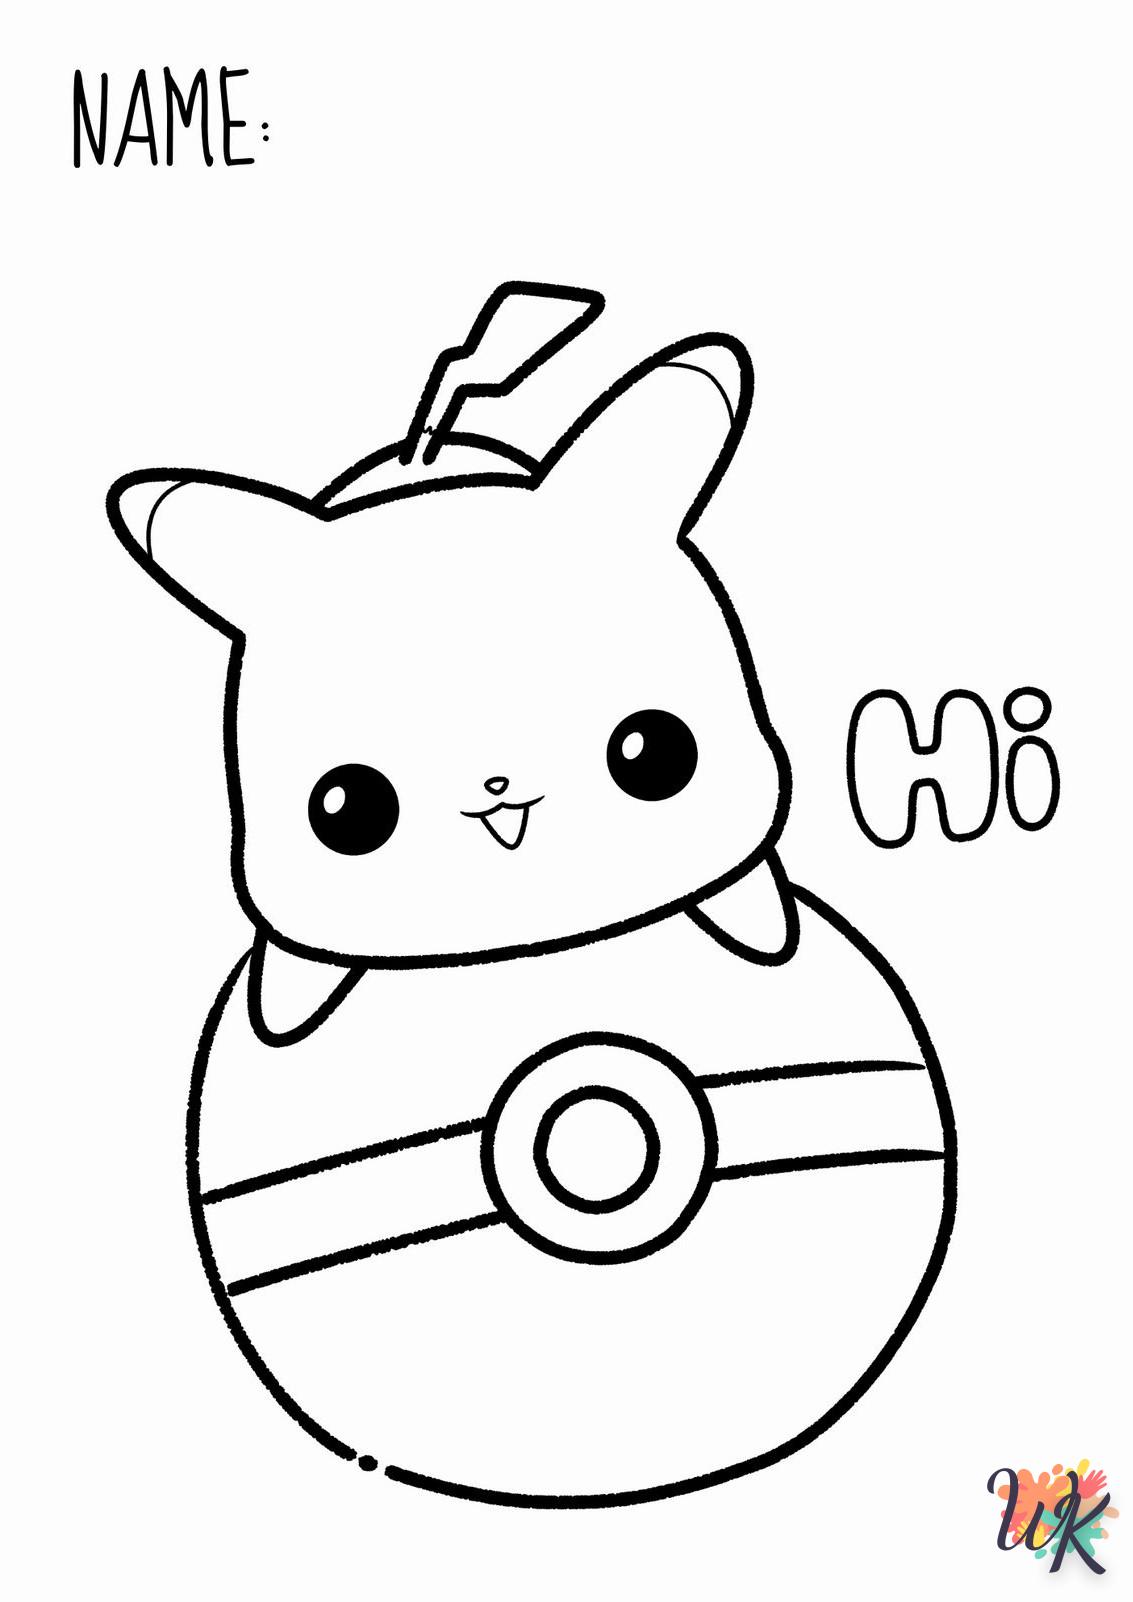 fun Pikachu coloring pages